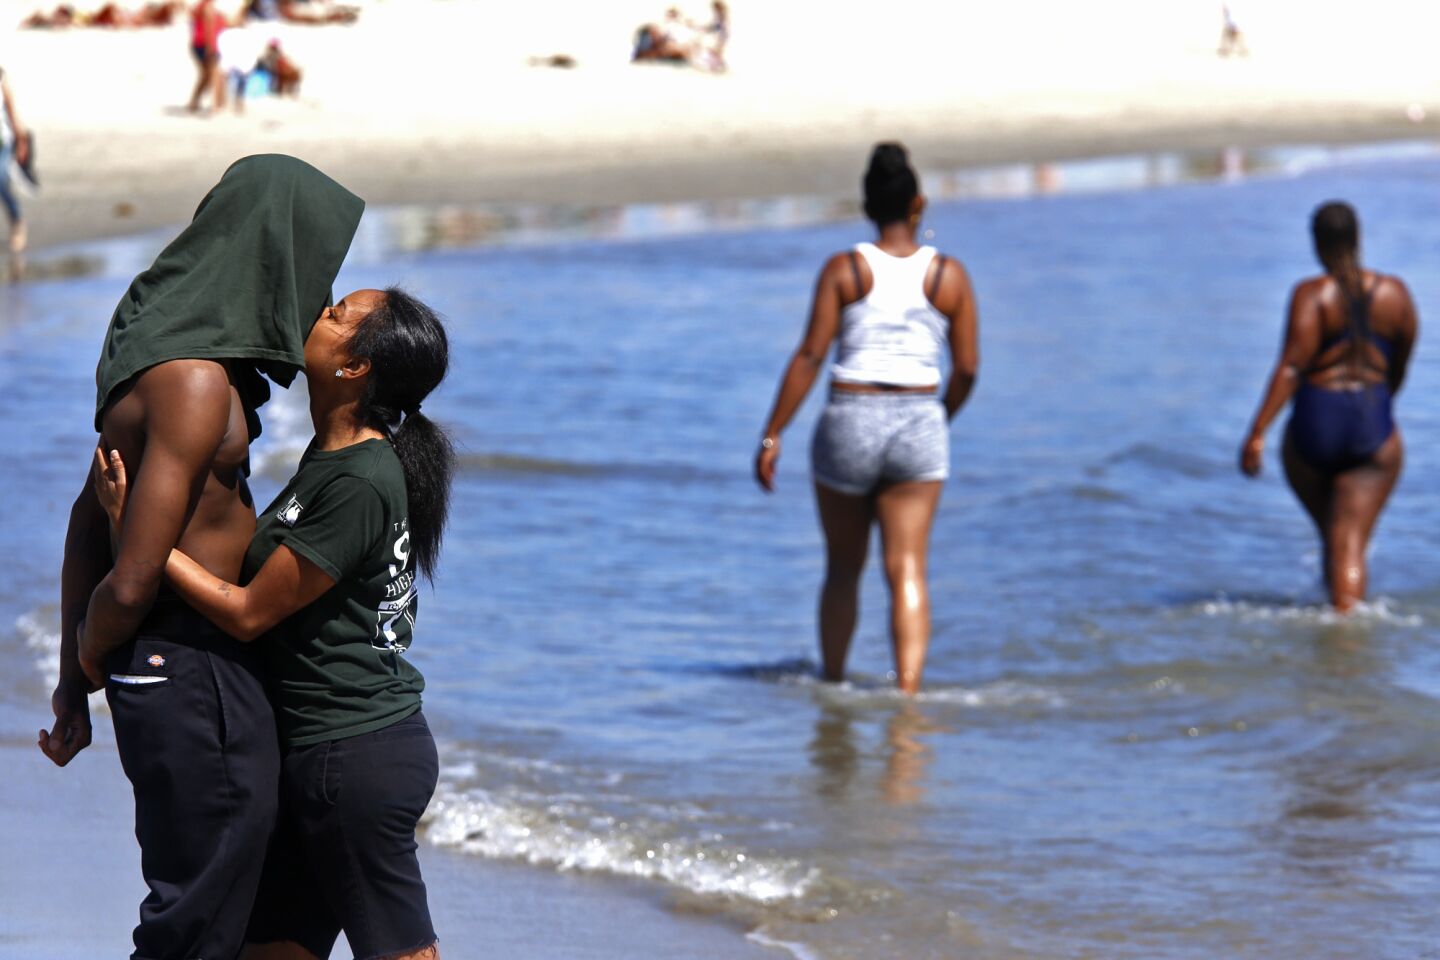 Laquisia Johnson, 21, gives her boyfriend David Flowers, 21, a kiss while the pair cool off at Venice Beach.